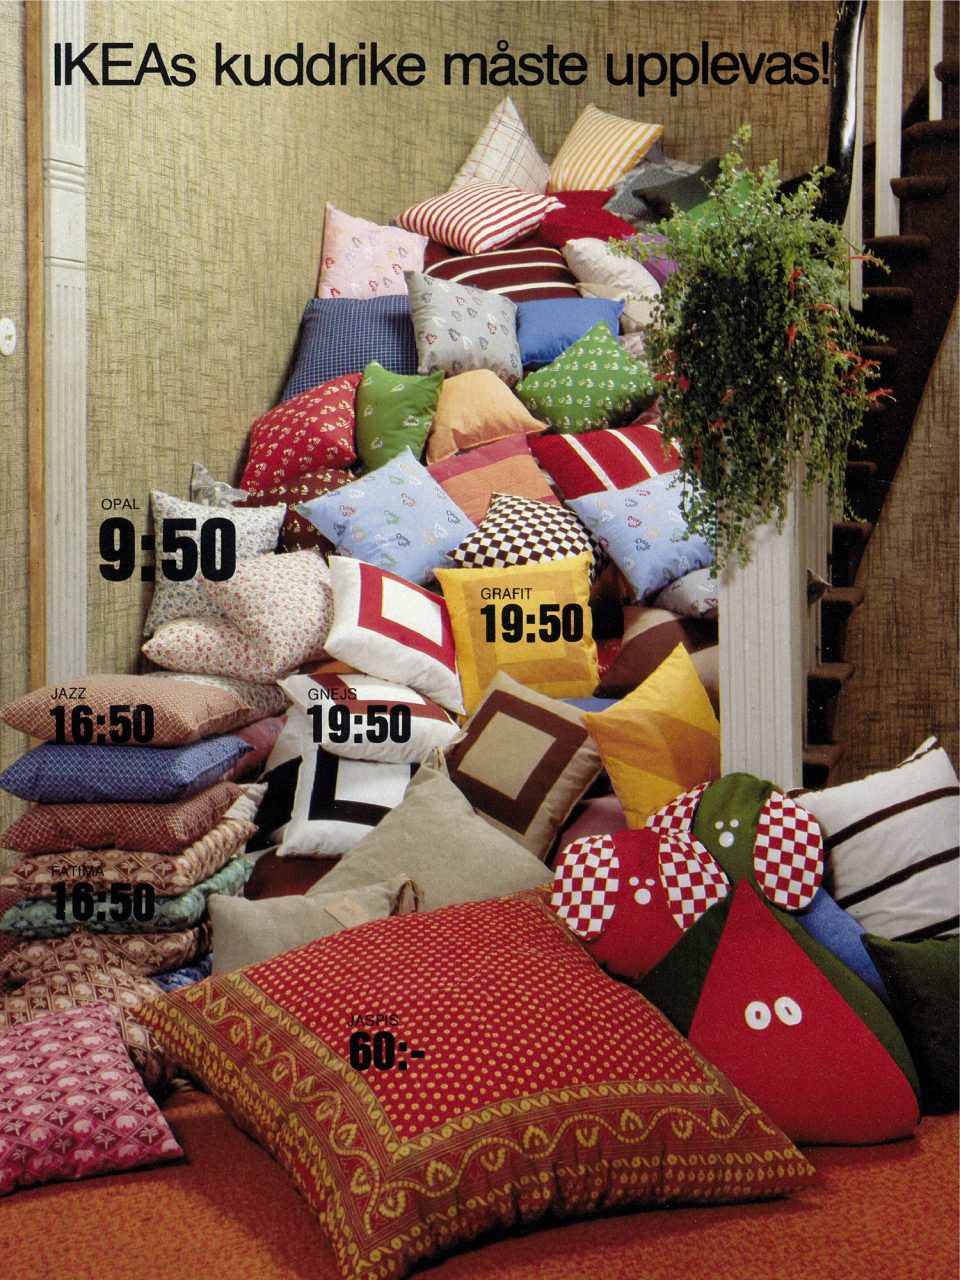 A room filled with pillows up to the ceiling in various patterns and colours.